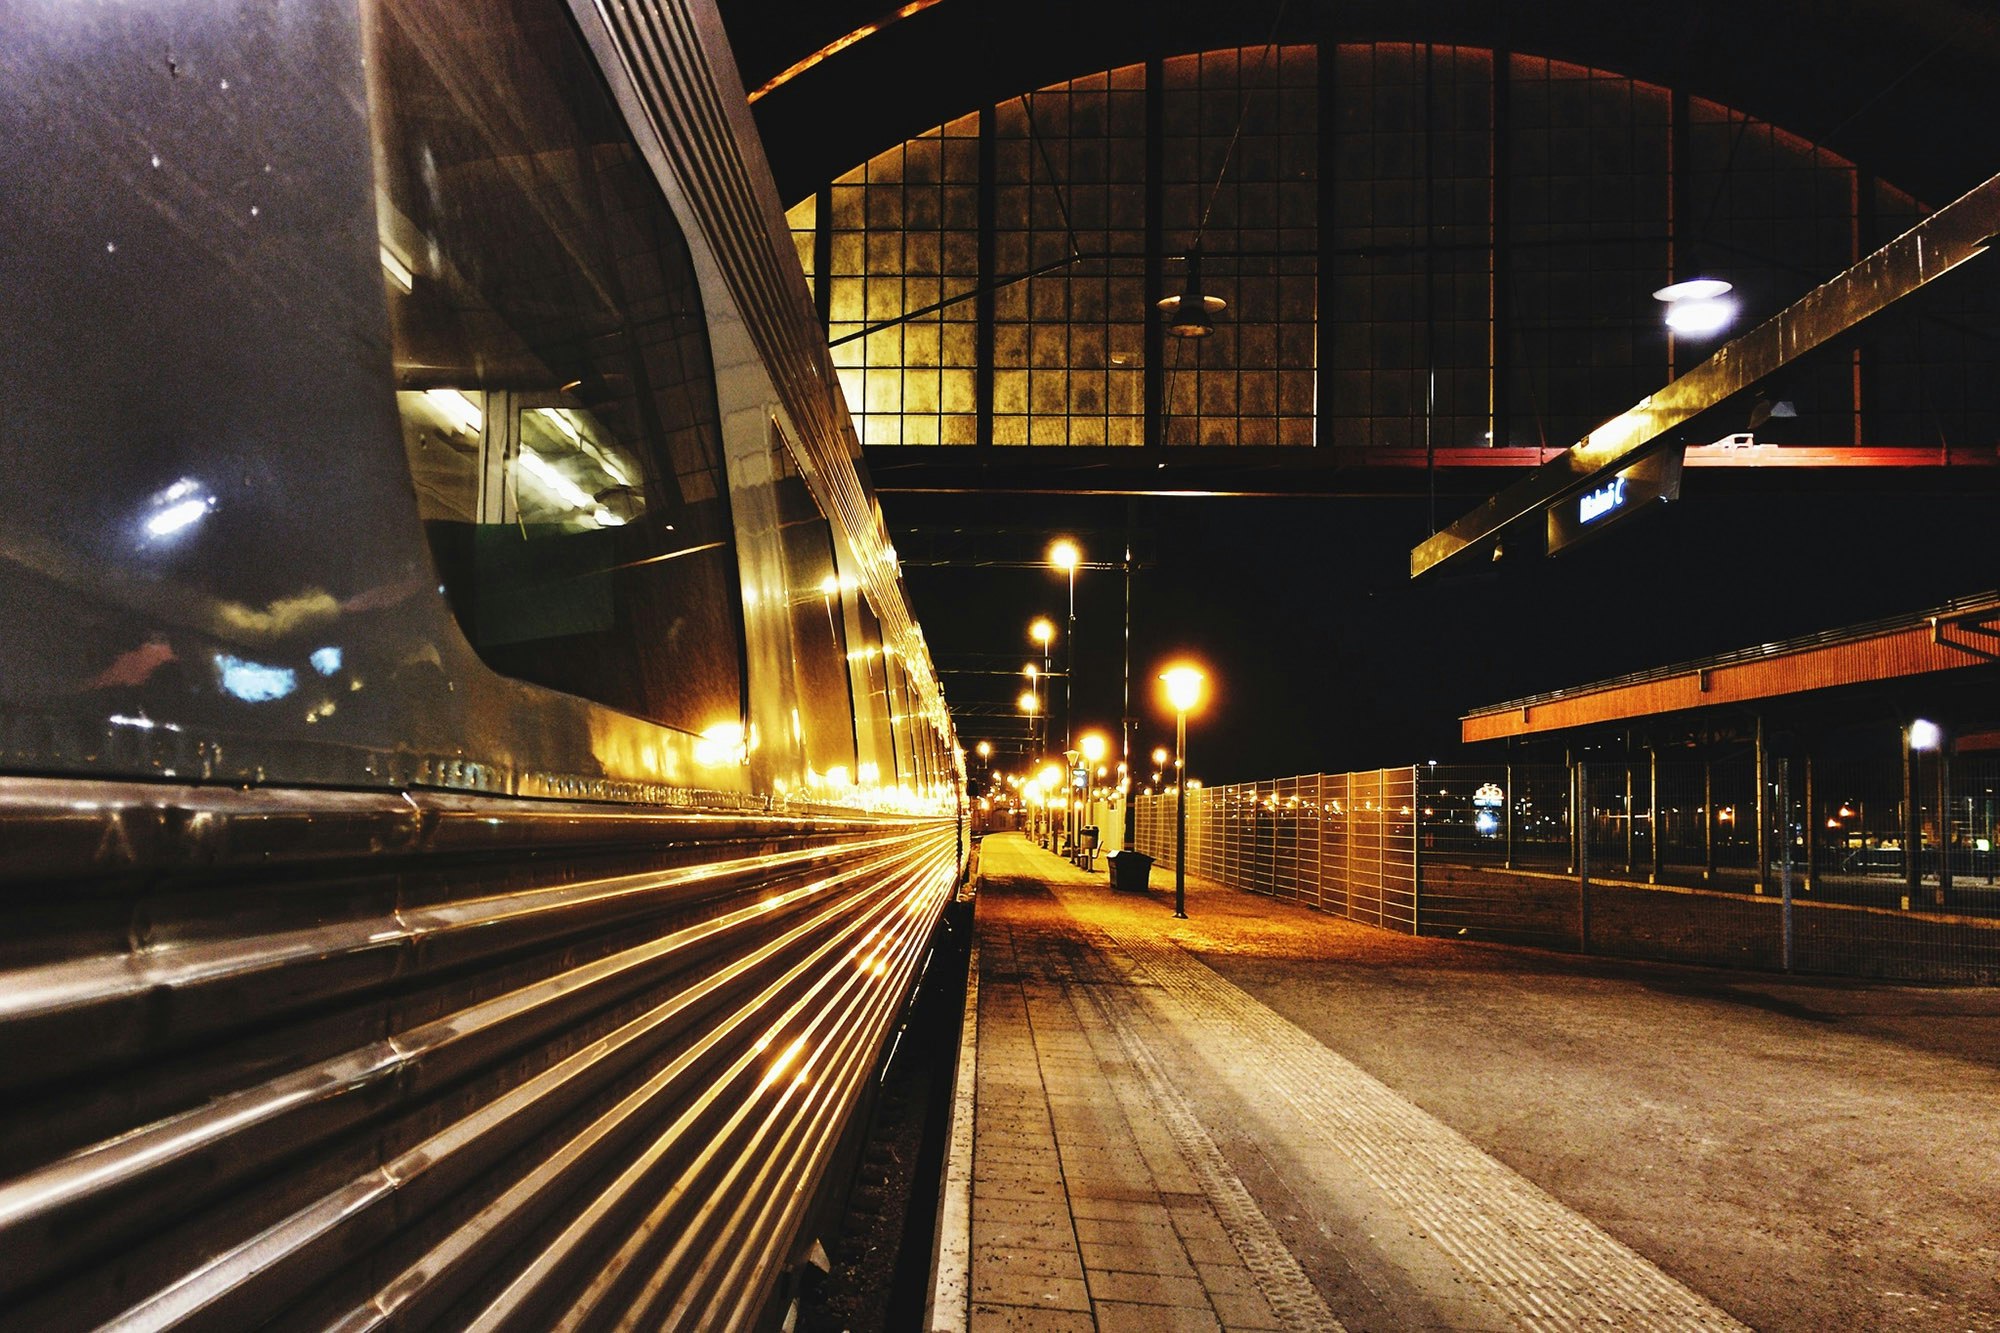 Sweden to introduce night train service to Belgium and Germany